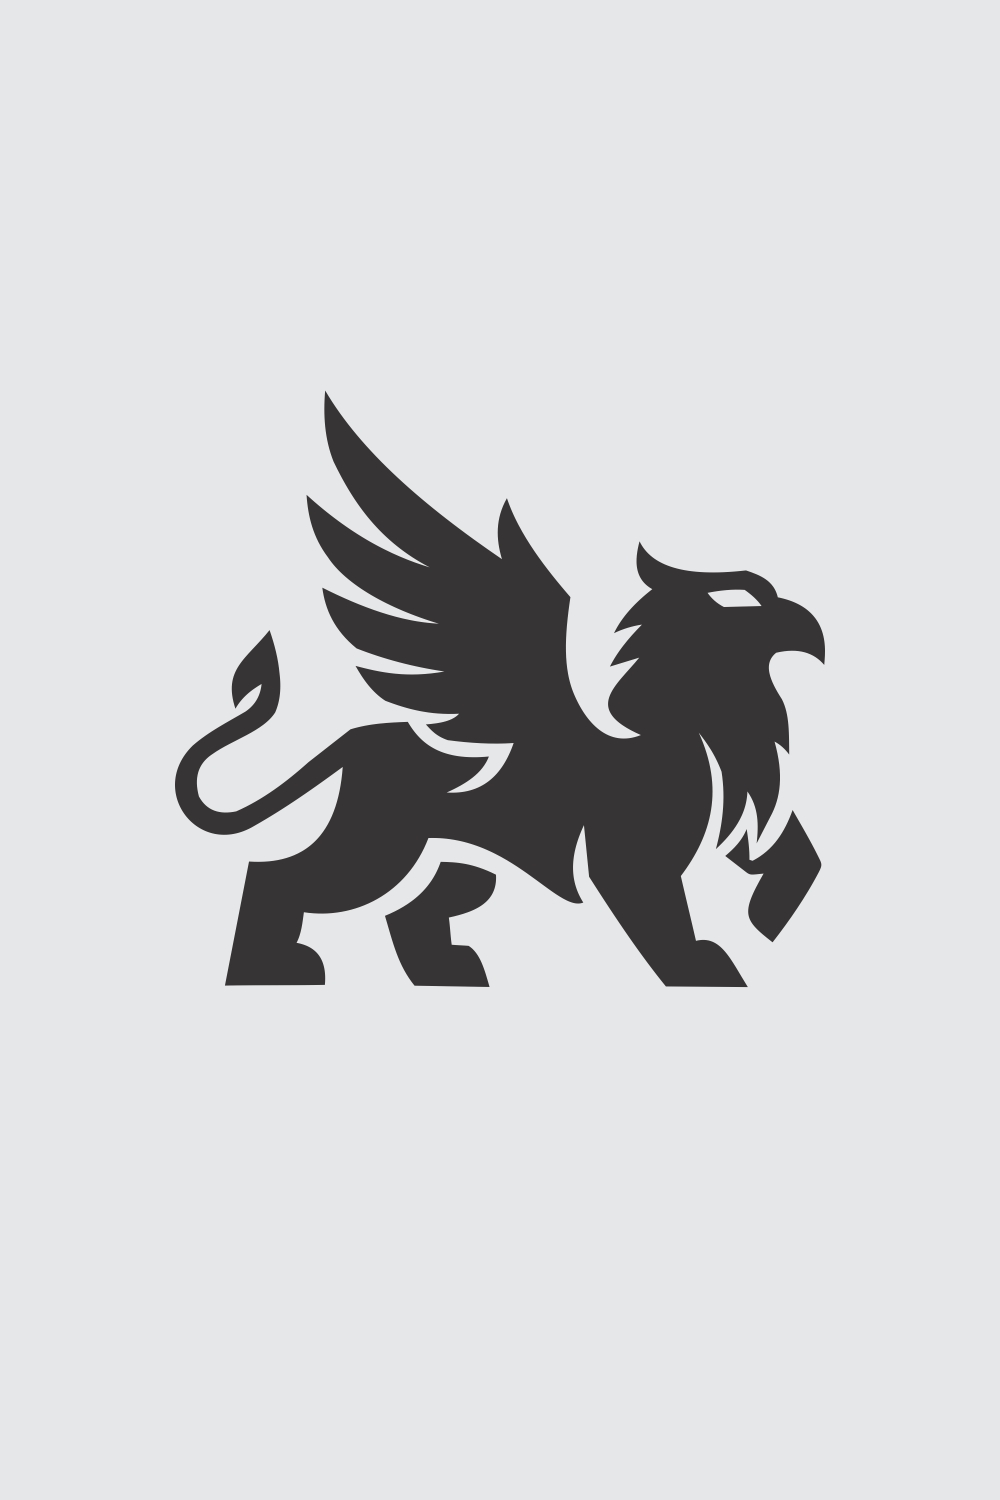 Gryphon Financial Griffin Logo pinterest preview image.